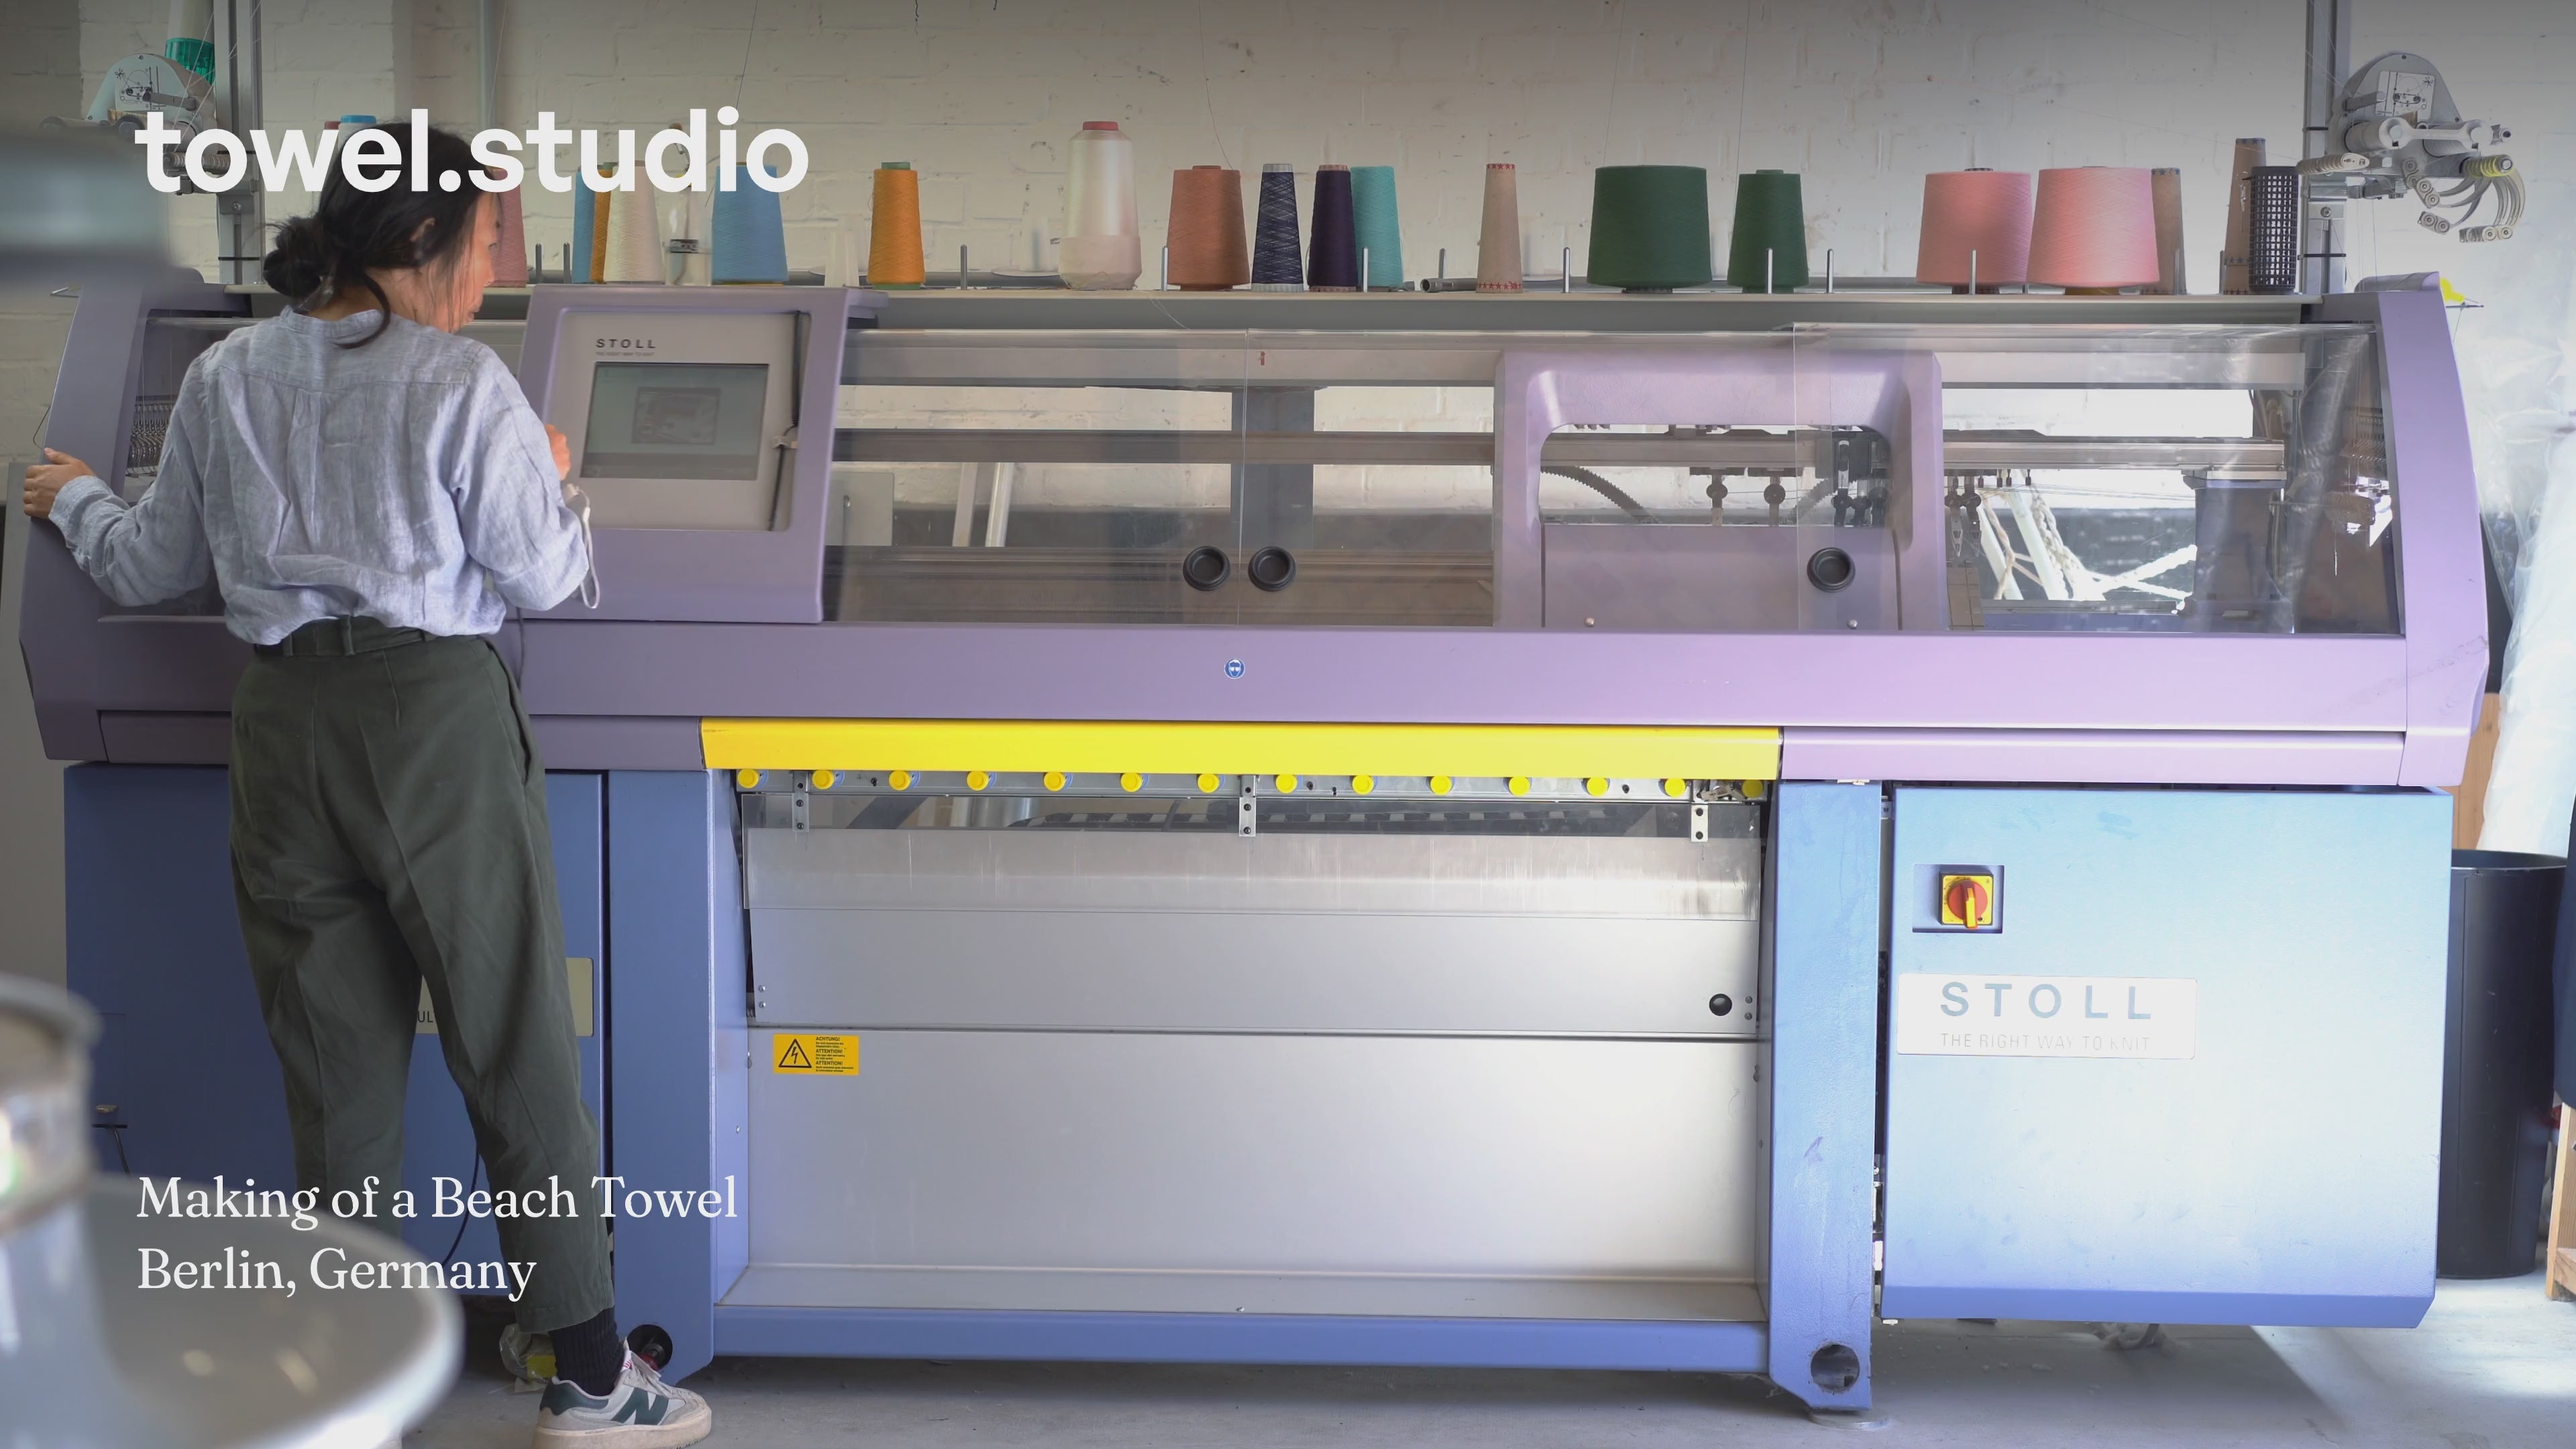 Load video: Video of a green and pink Arrow Tail Beach Towel being produced on a flat-bed knitting machine, then hand-finished in the workshop of towel.studio in Berlin, Germany.